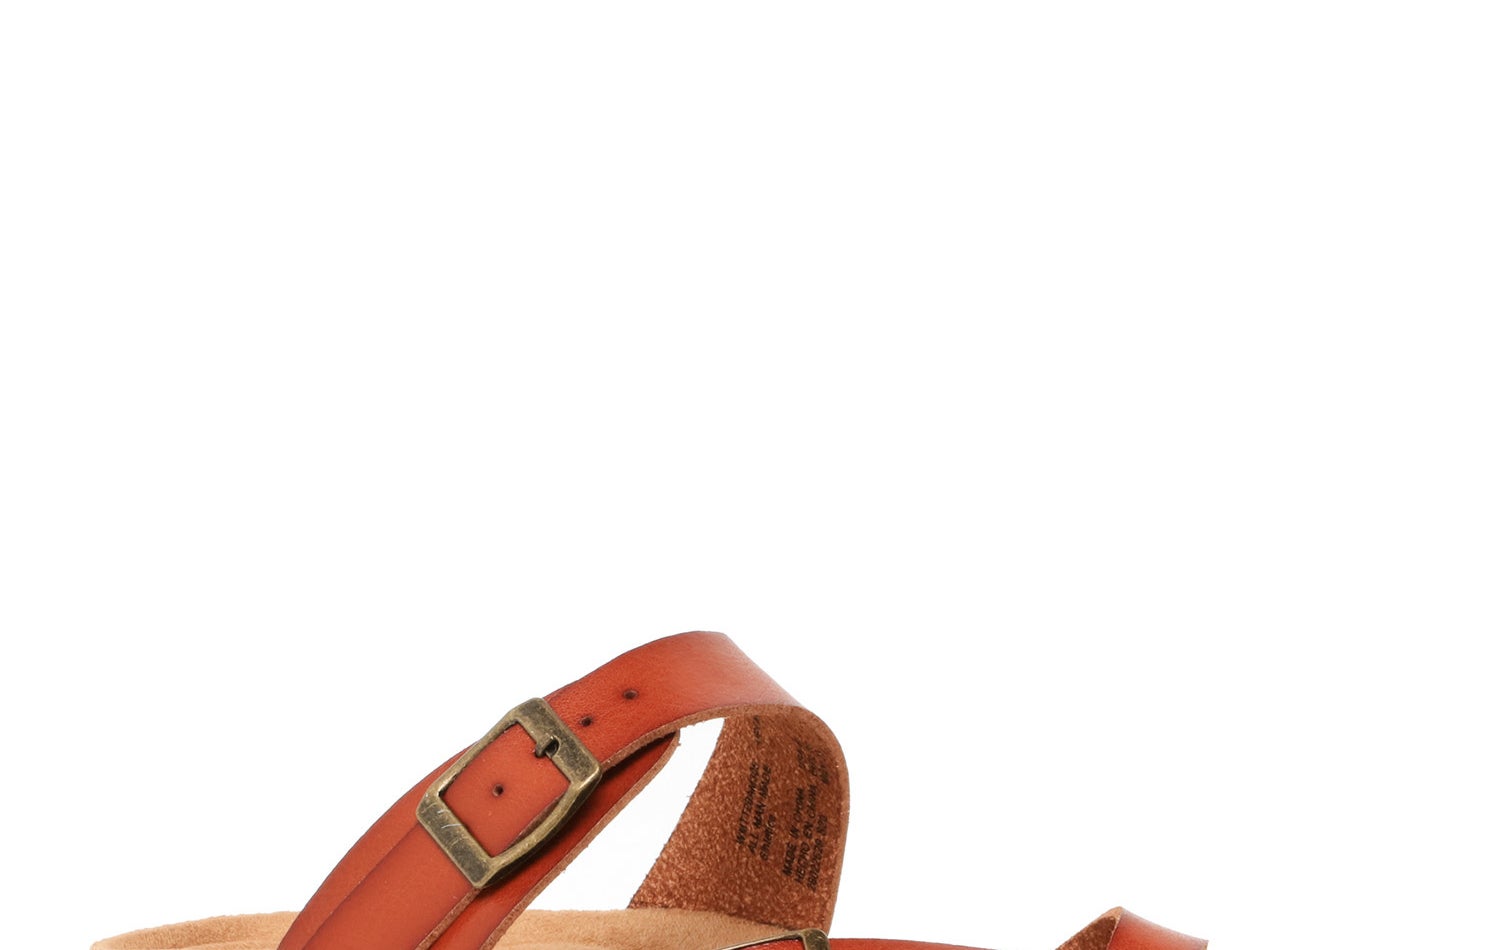 The sandal with burnt orange straps and a cork sole